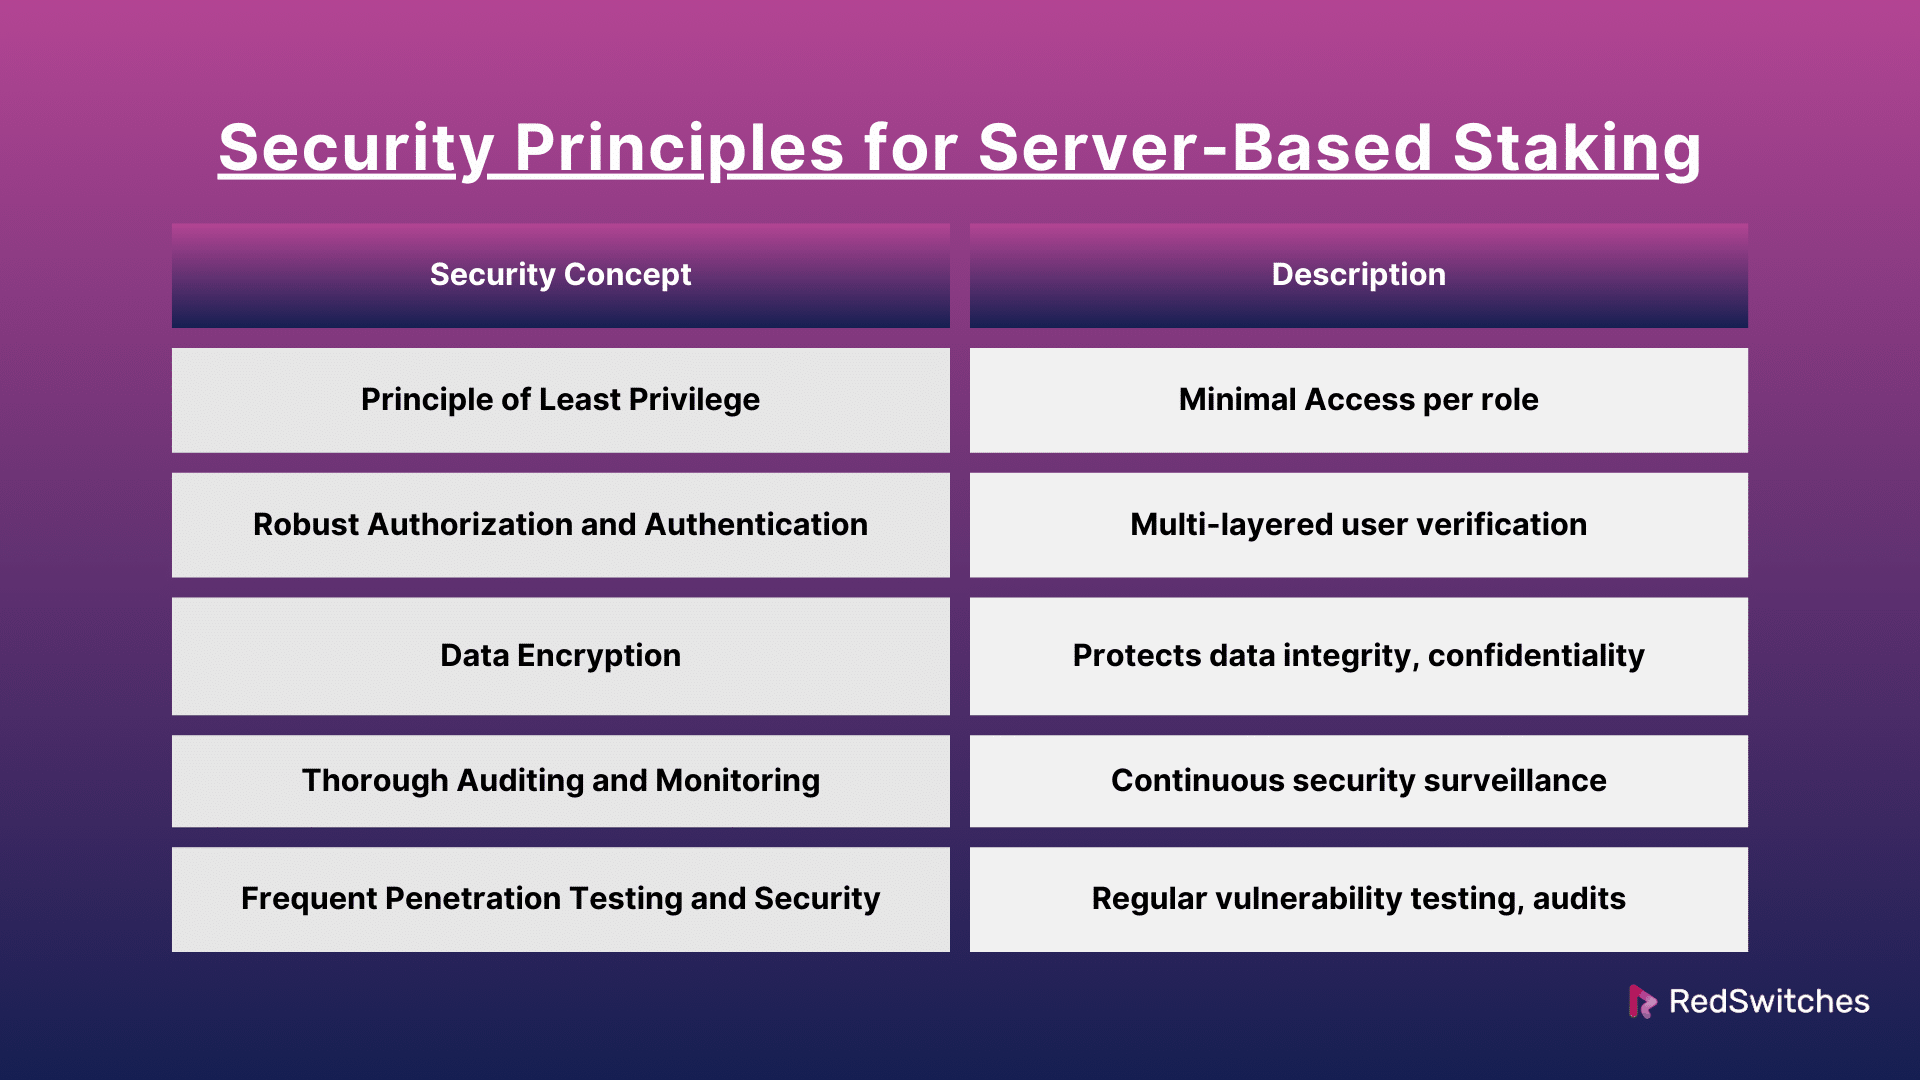 Security Principles for Server-Based Staking